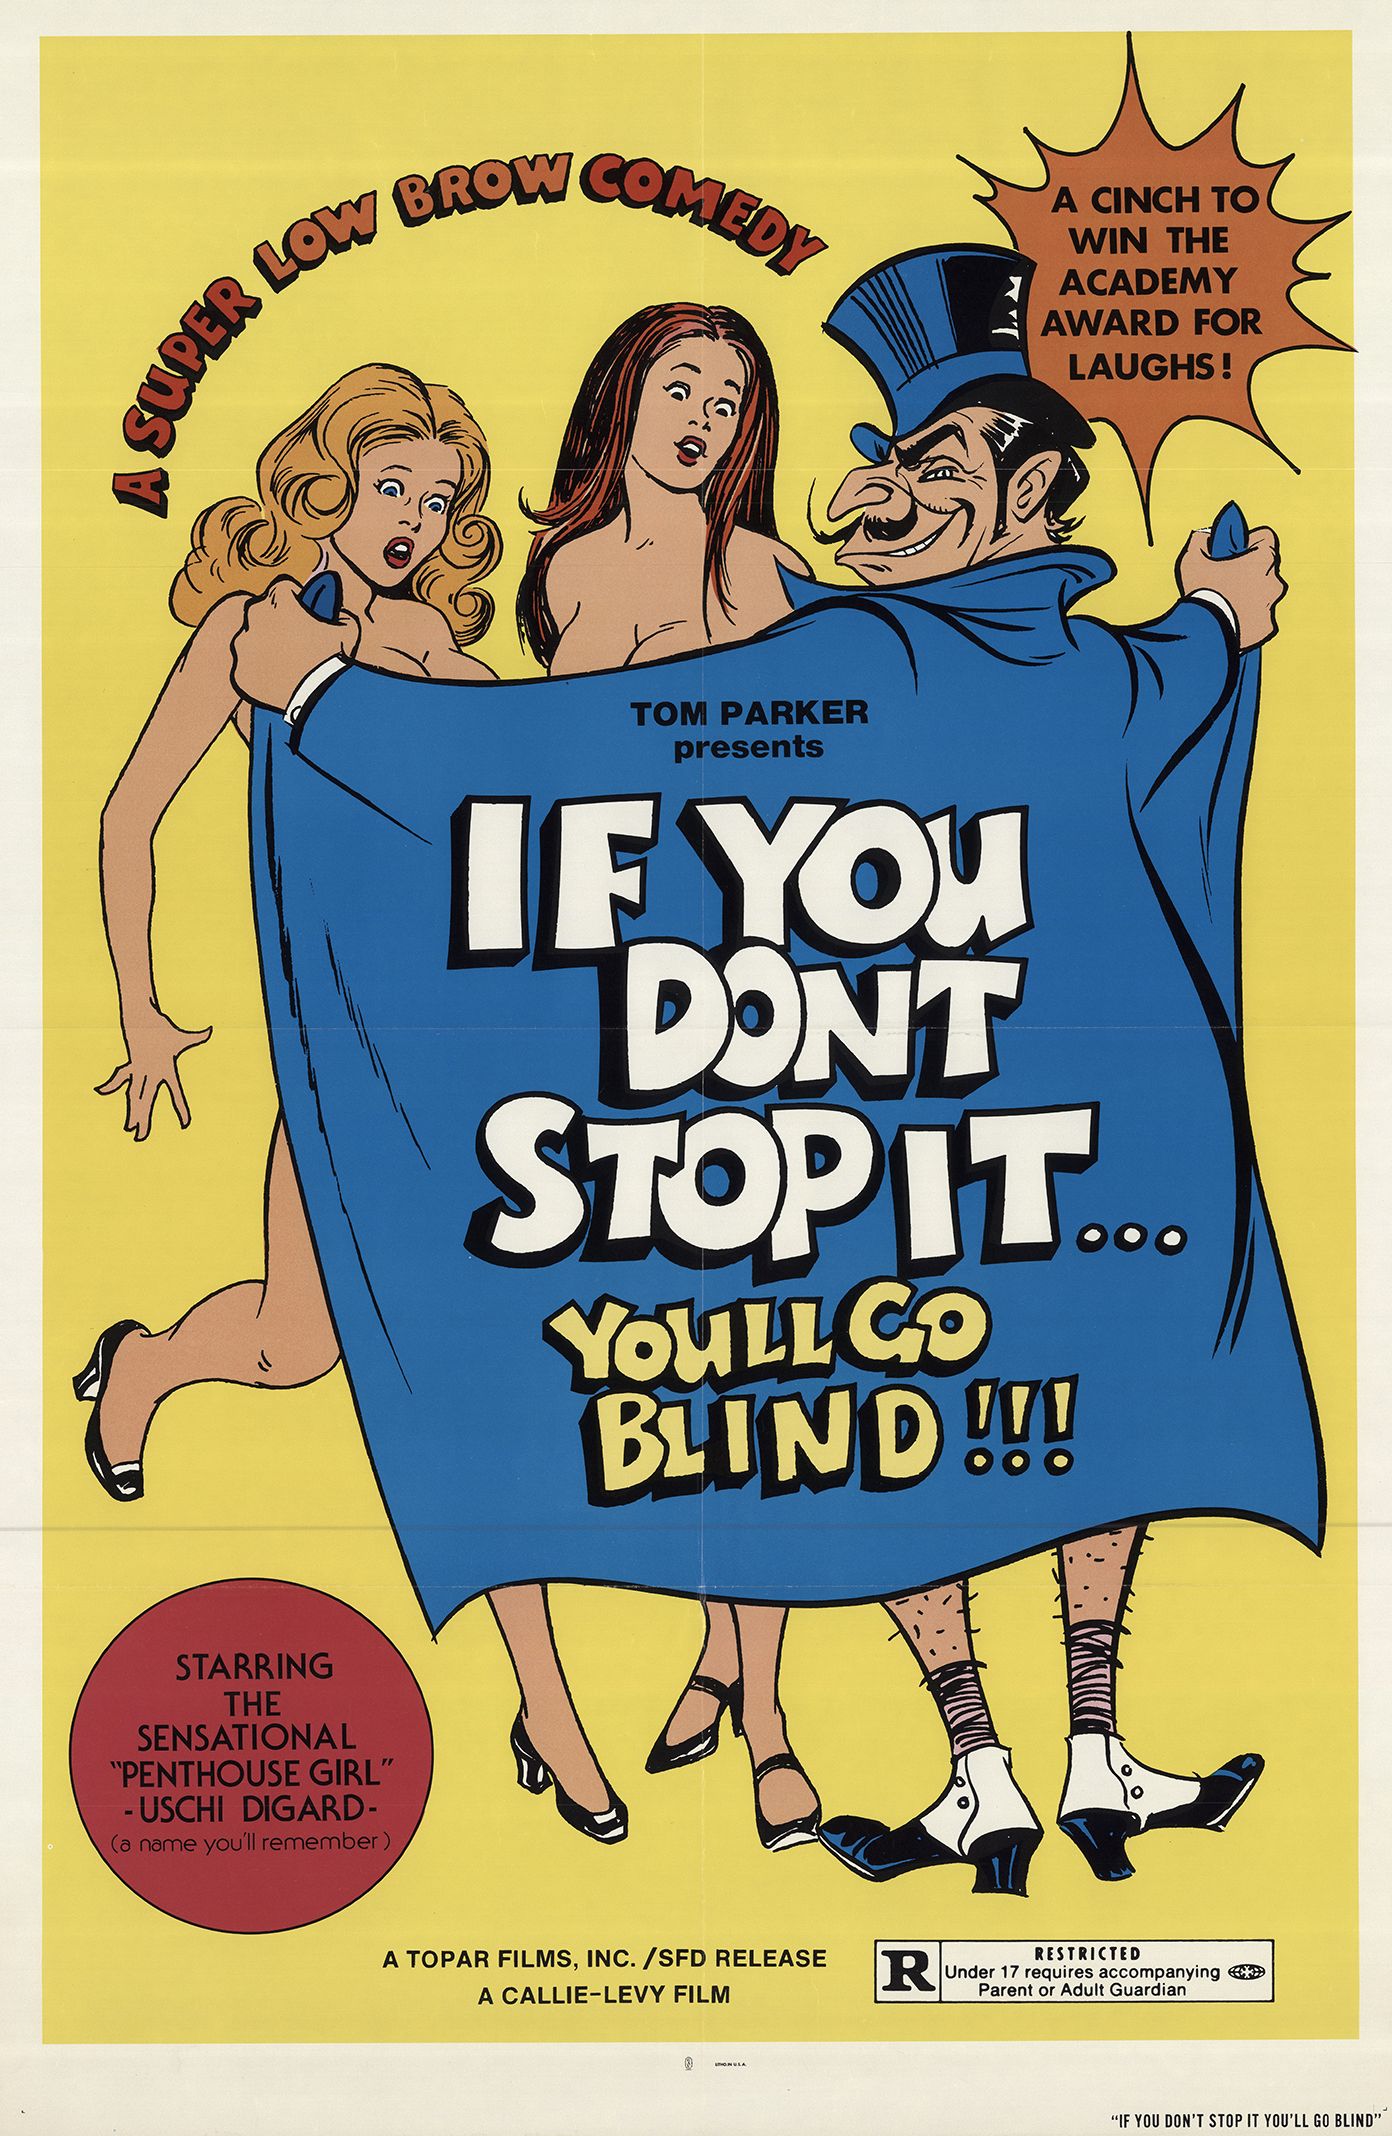 If You Don't Stop It... You'll Go Blind!!! (1975) Screenshot 1